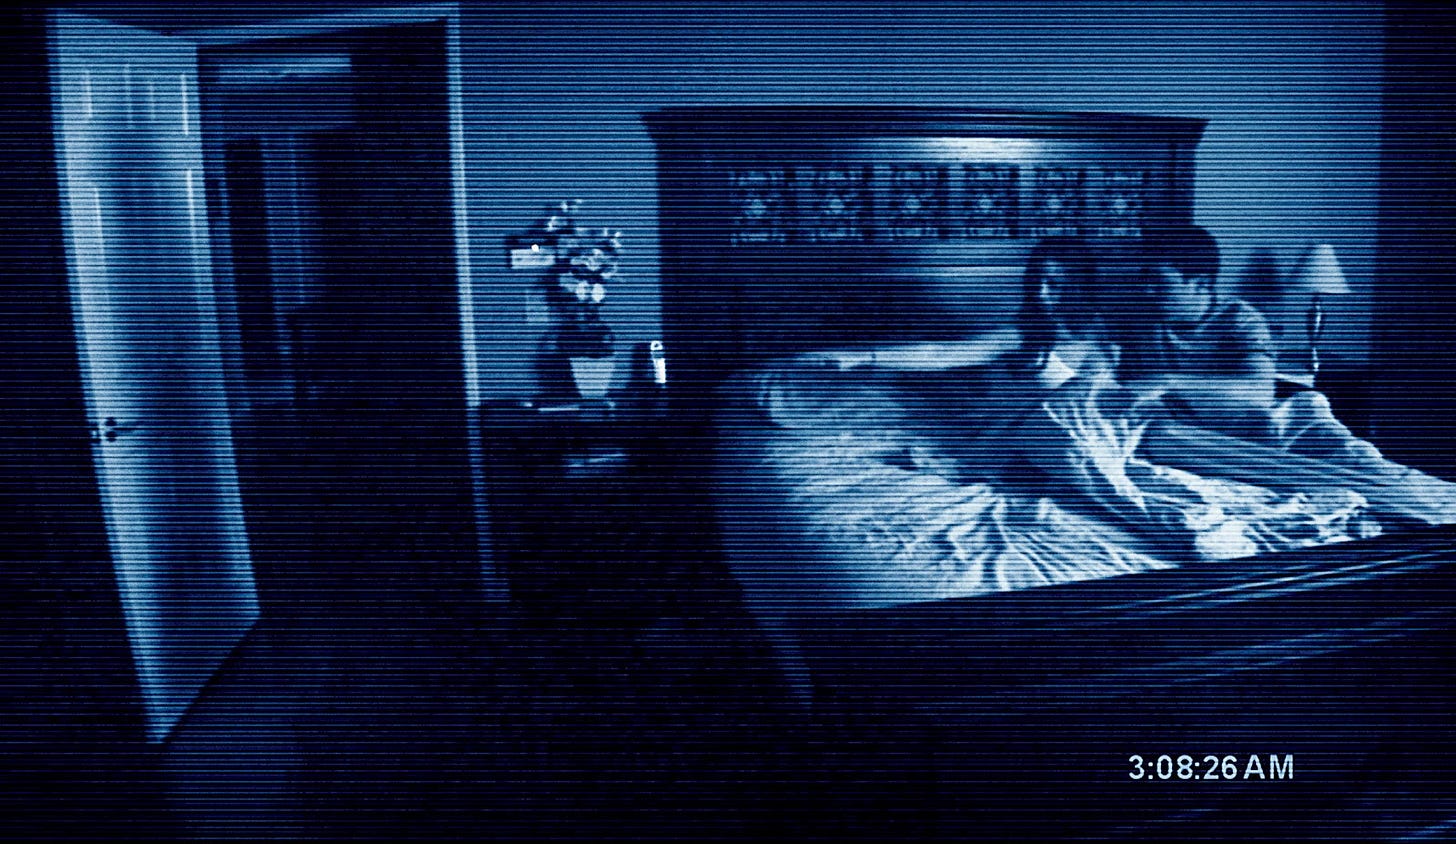 em>REEL LIFE: 'Paranormal Activity 2' spooks and satisfies moviegoers, even  those new to series</em> - Daily Bruin